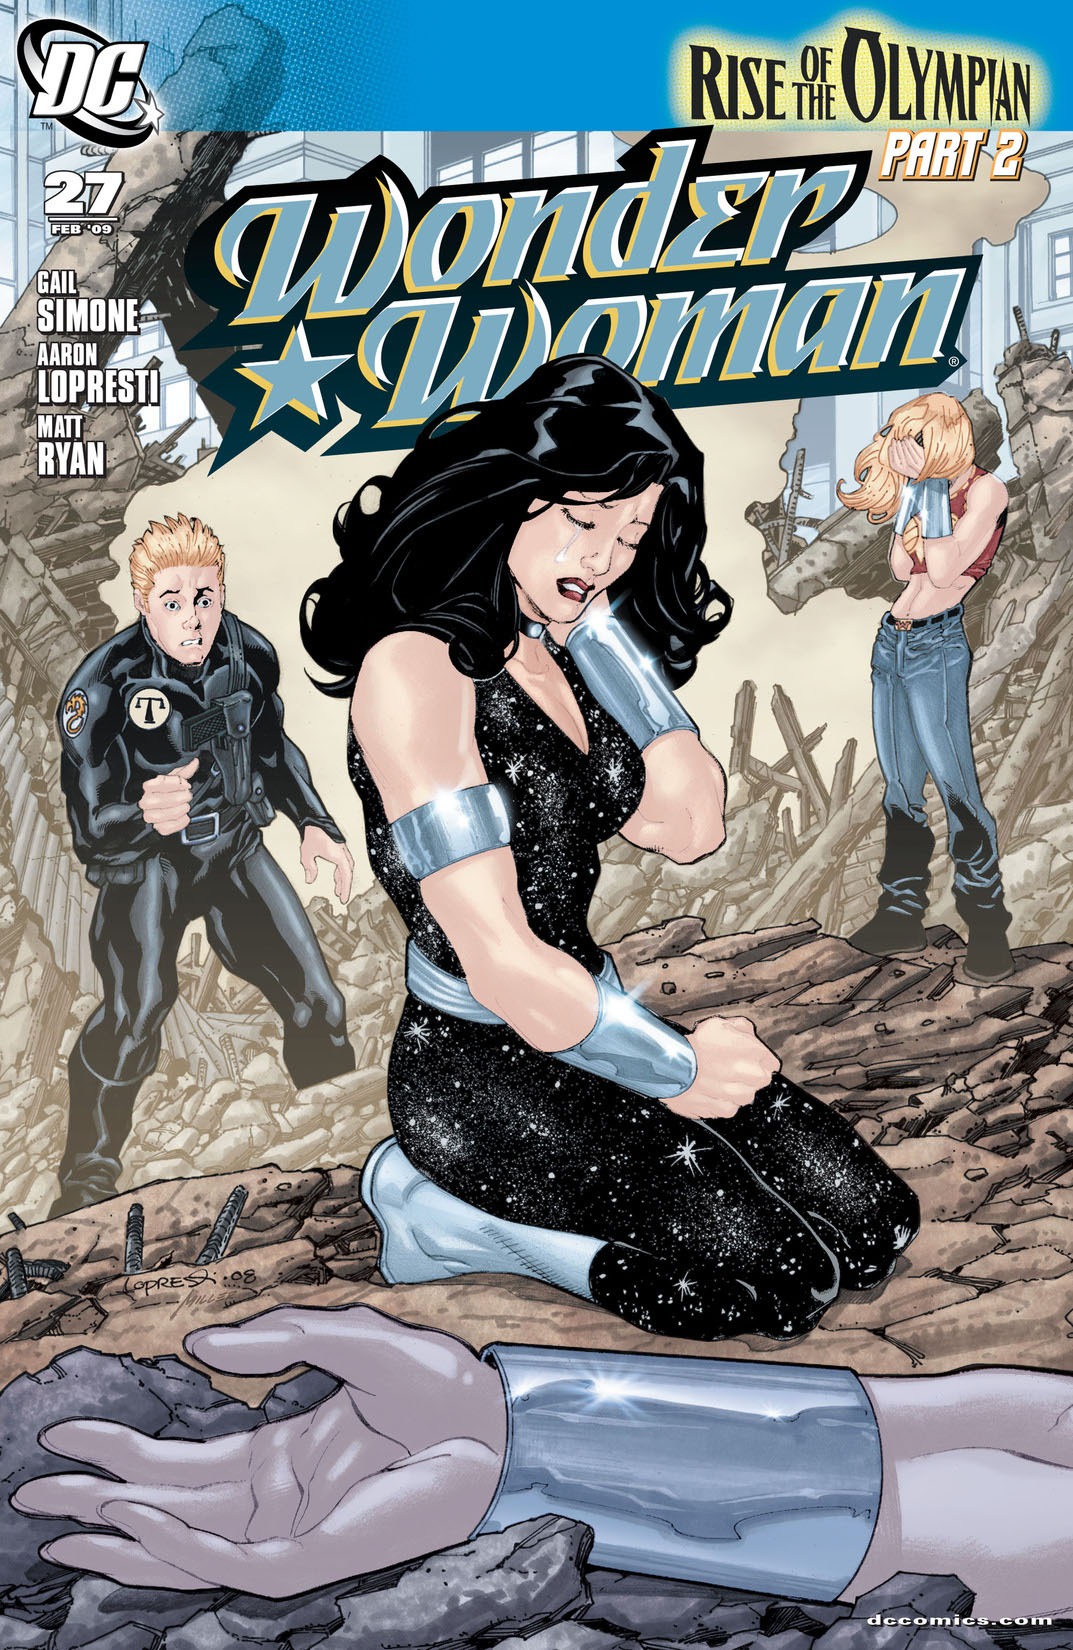 Wonder Woman (2006-) #27 preview images